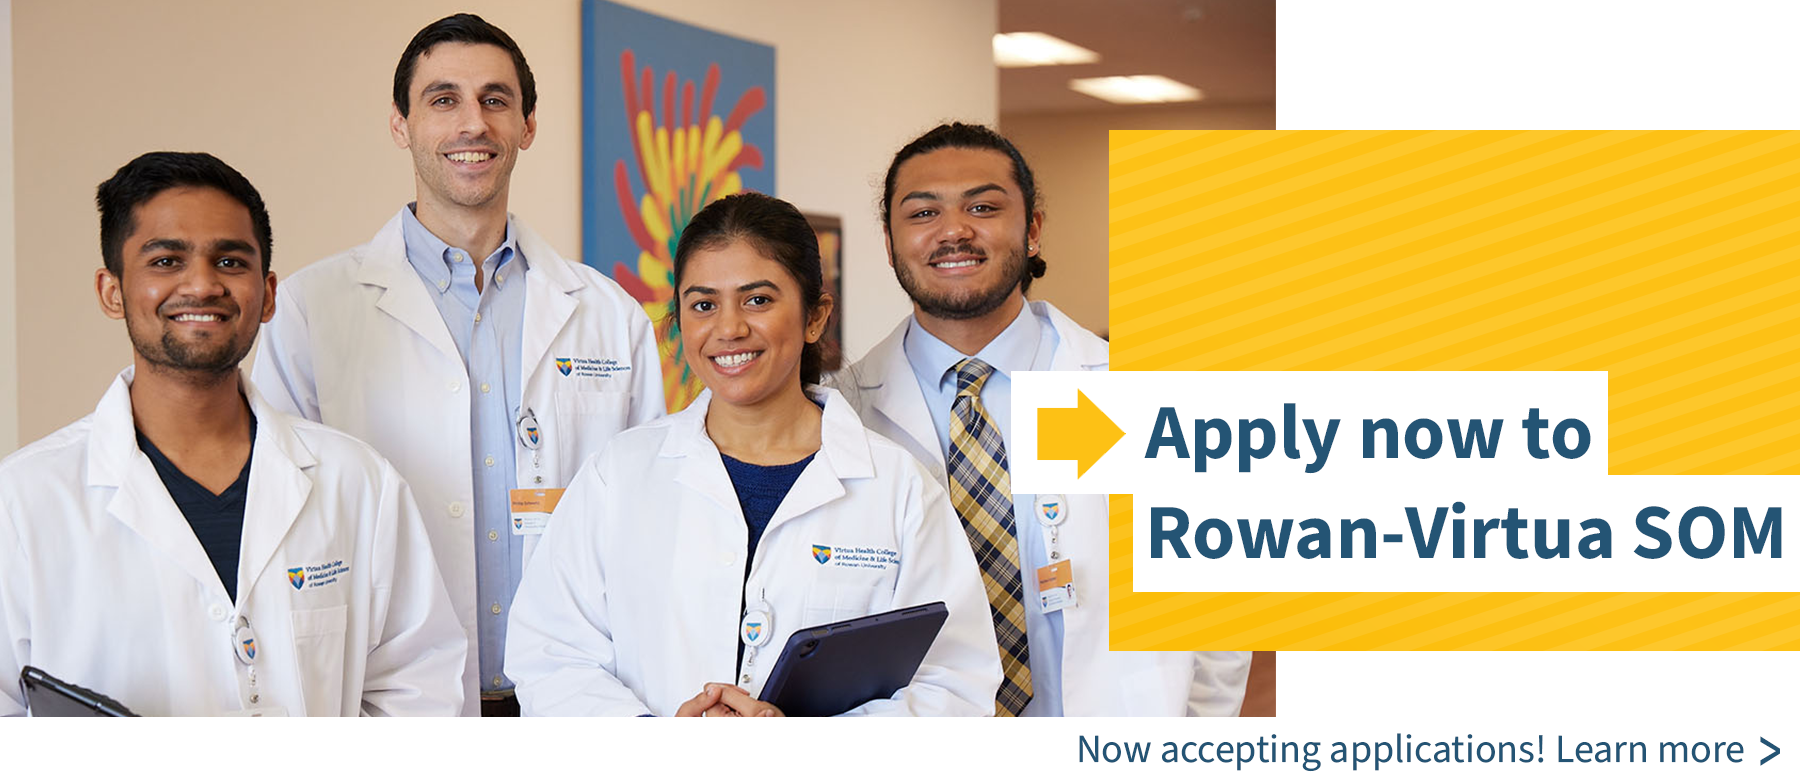 RowanSOM is now accepting applications - click here to learn more